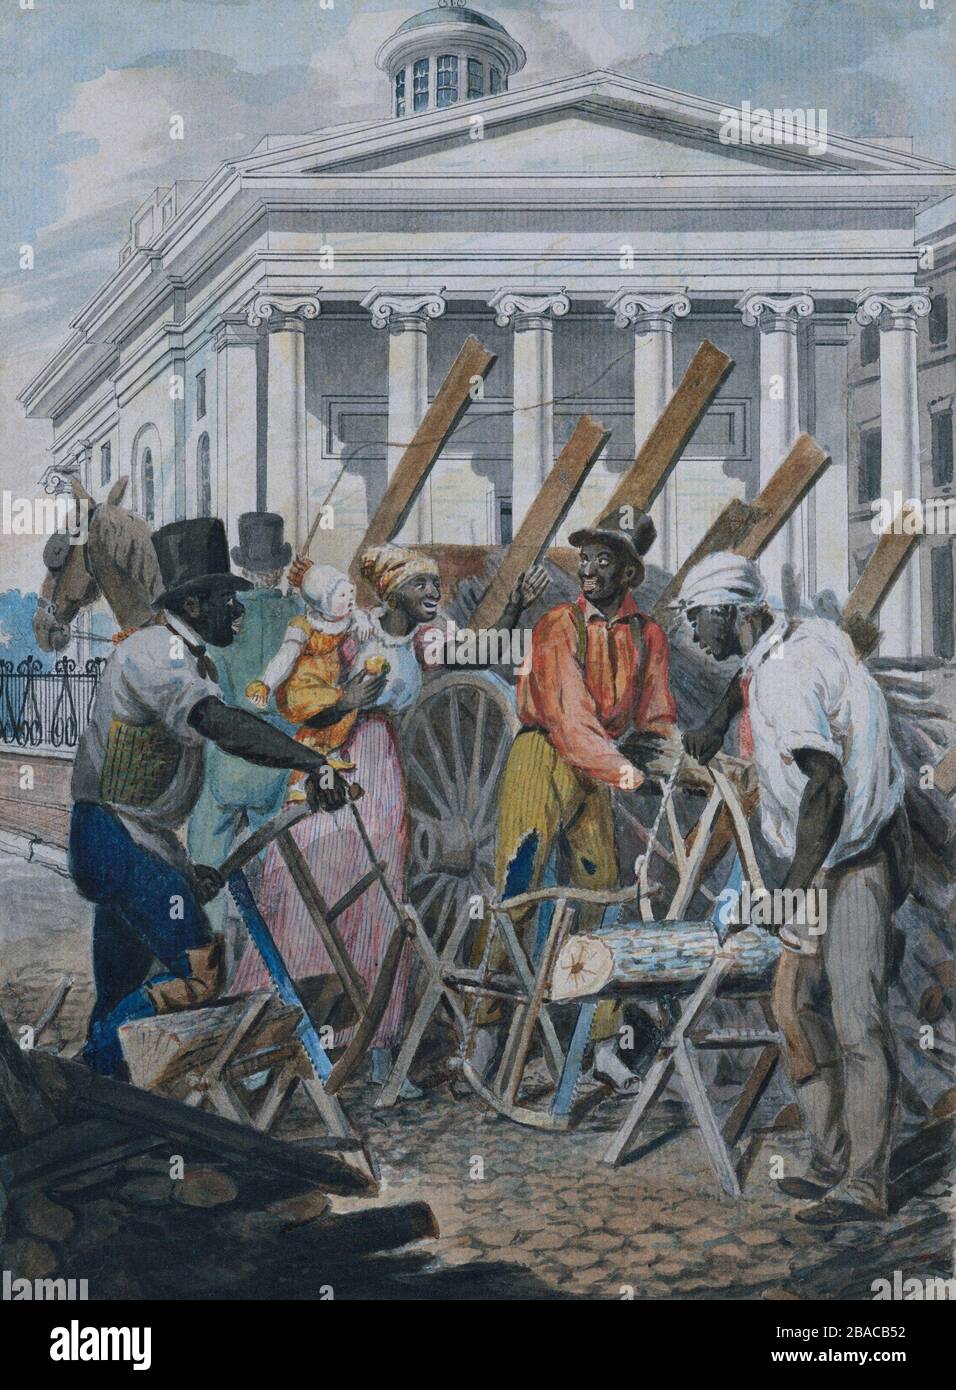 'Black sawyers working in front of the Bank of Pennsylvania, Philadelphia', by John Lewis Krimmel, 1811-13. They are cutting firewood, which heated the cities homes and stoves. Among them is an African American women holding a white child in her charge  (BSLOC 2019 7 205) Stock Photo